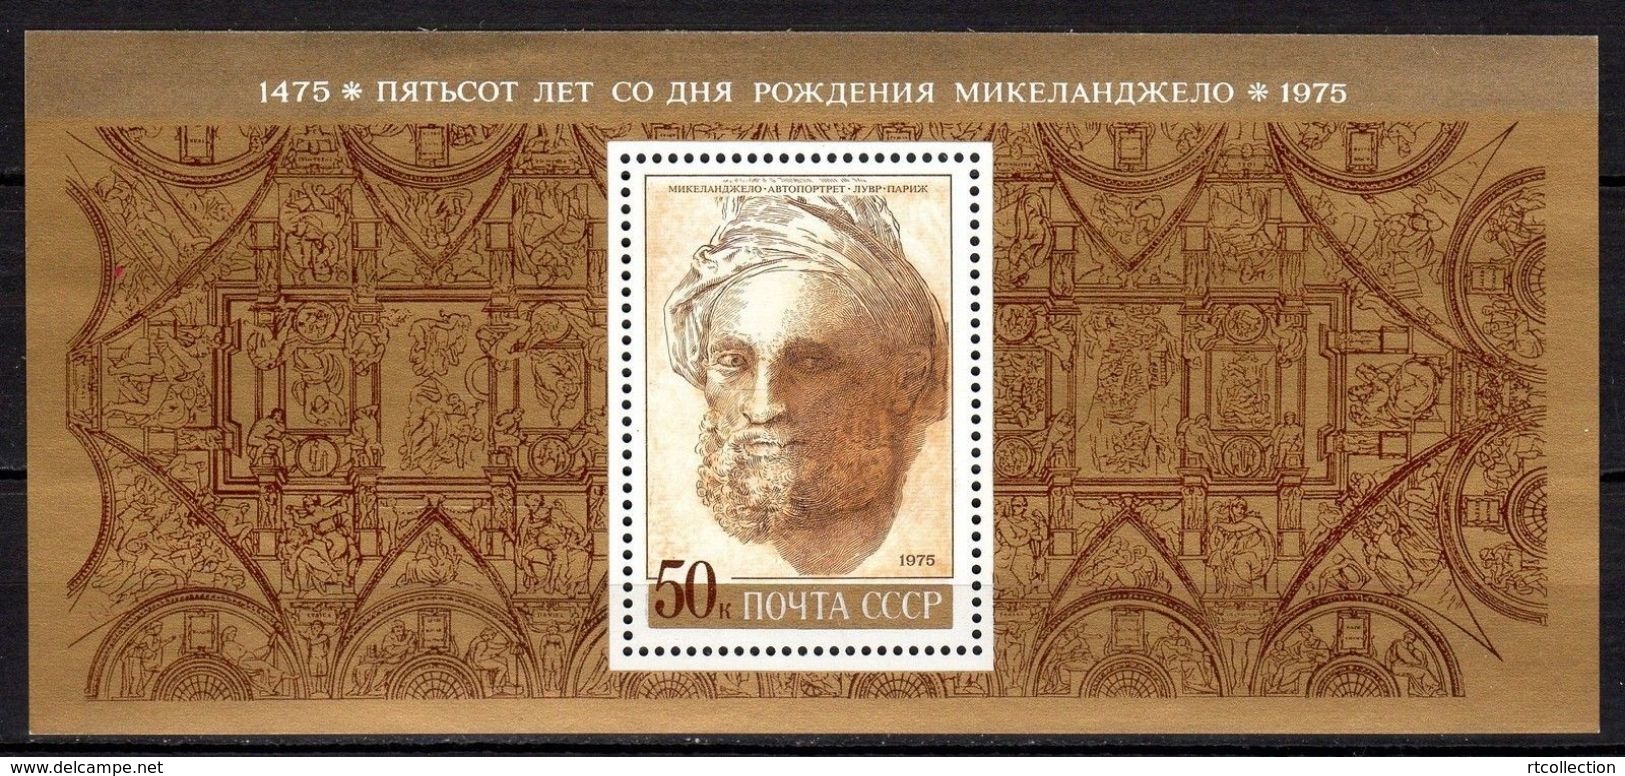 USSR Russia 1975 Michelangelo 500th Birth Anni ART Artist Portrait People Paiting S/S Stamp MNH Michel Bl.101 Sc 4302 - Collections